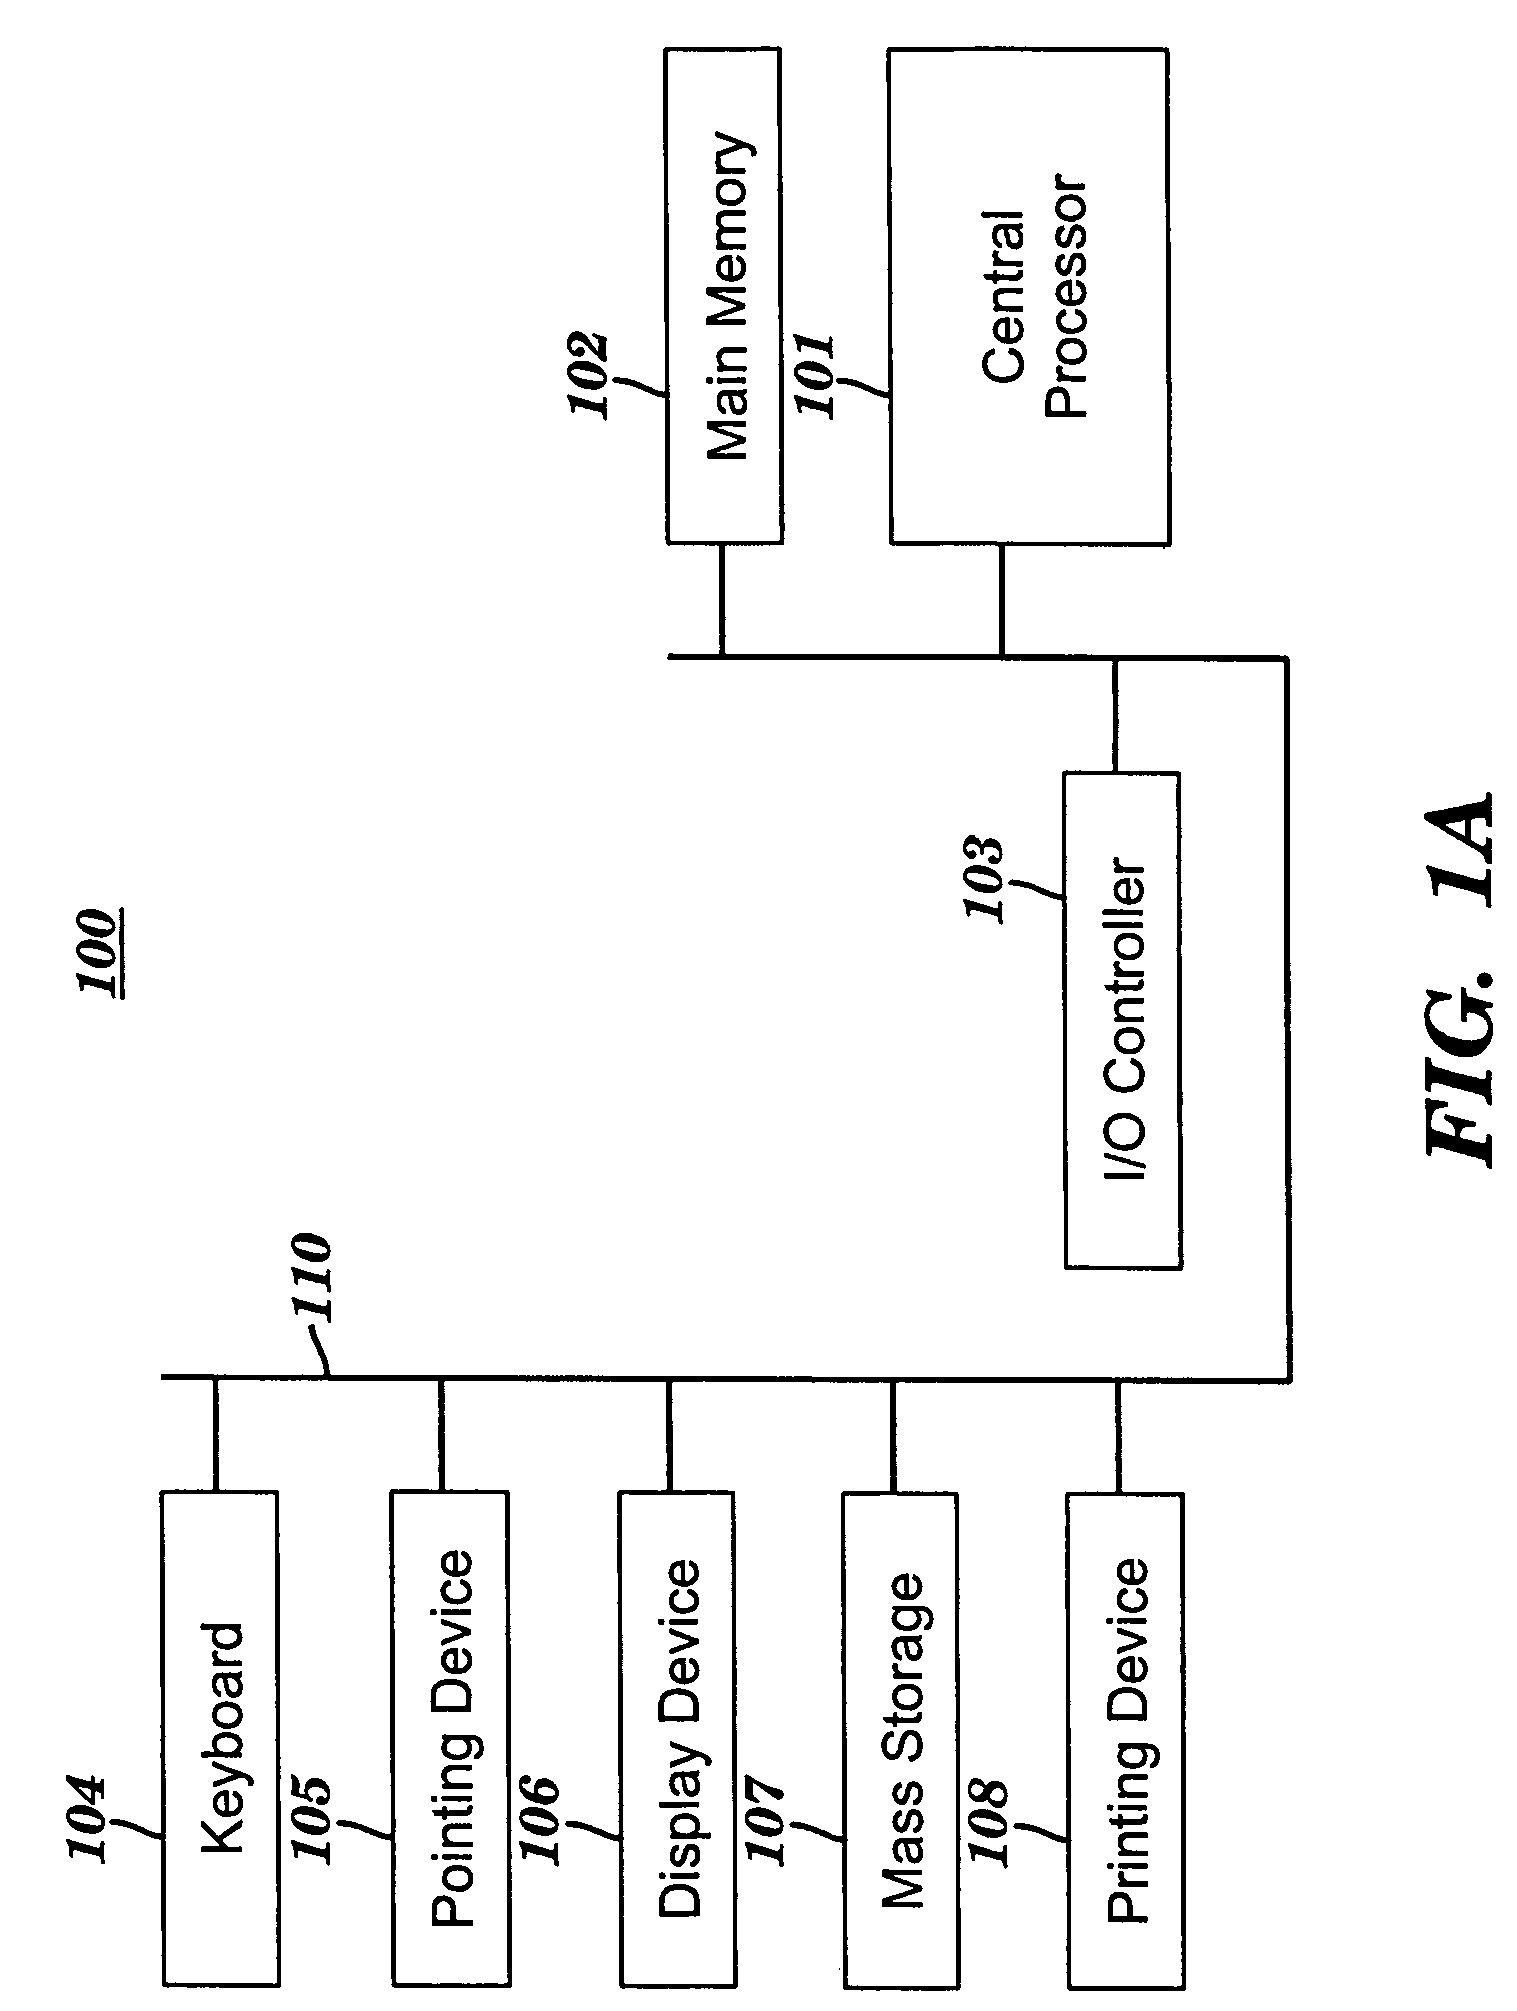 System and method for performing over time statistics in an electronic spreadsheet environment